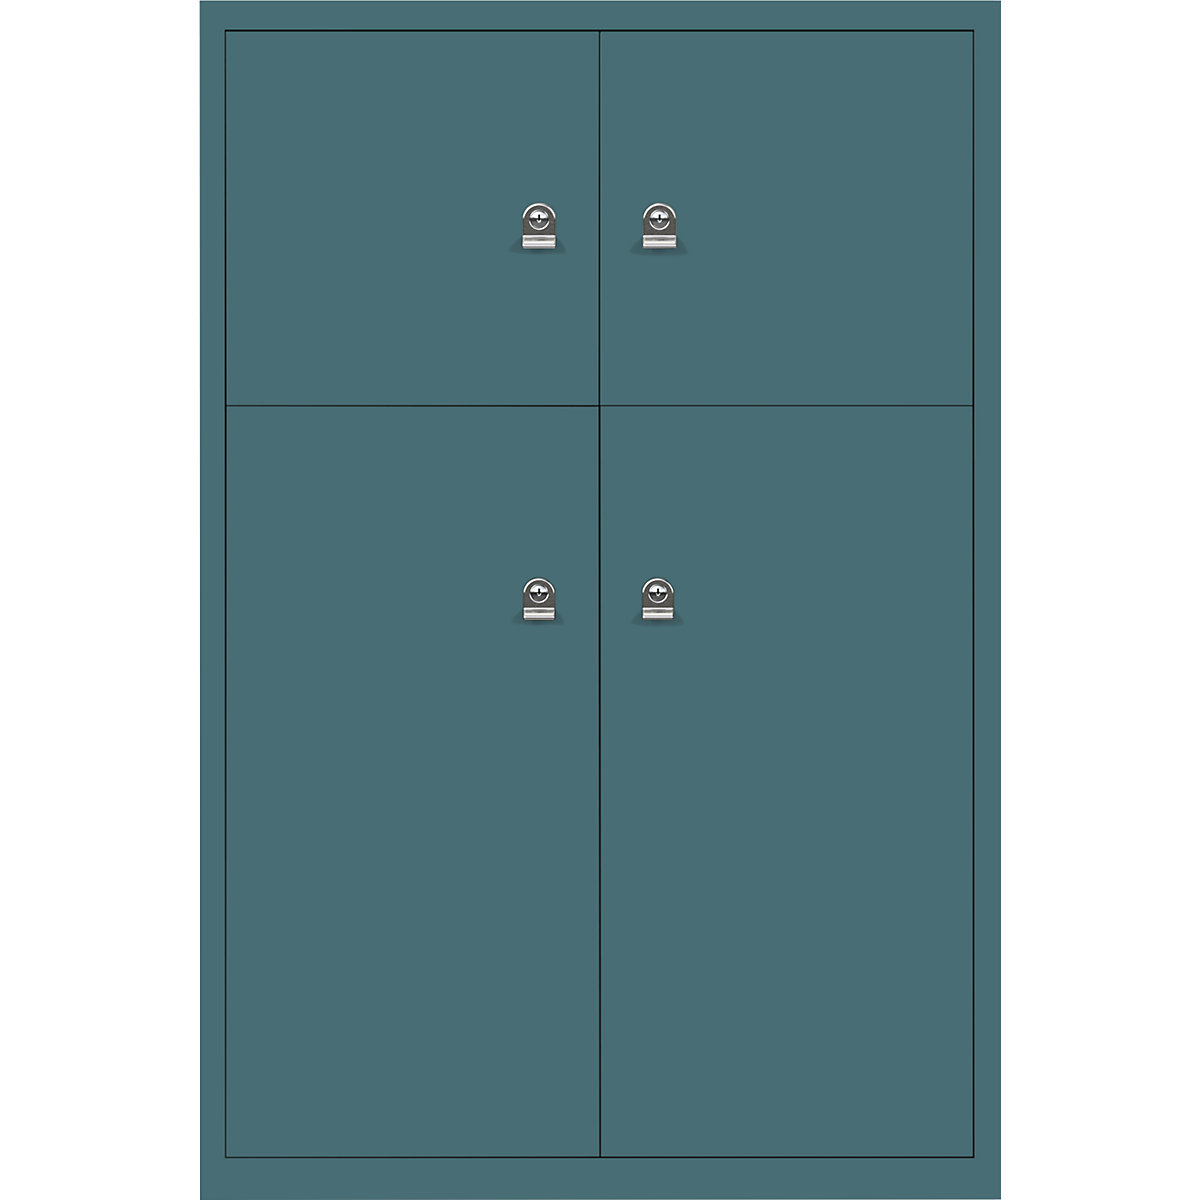 BISLEY – LateralFile™ lodge, with 4 lockable compartments, height 2 x 375 mm, 2 x 755 mm, doulton